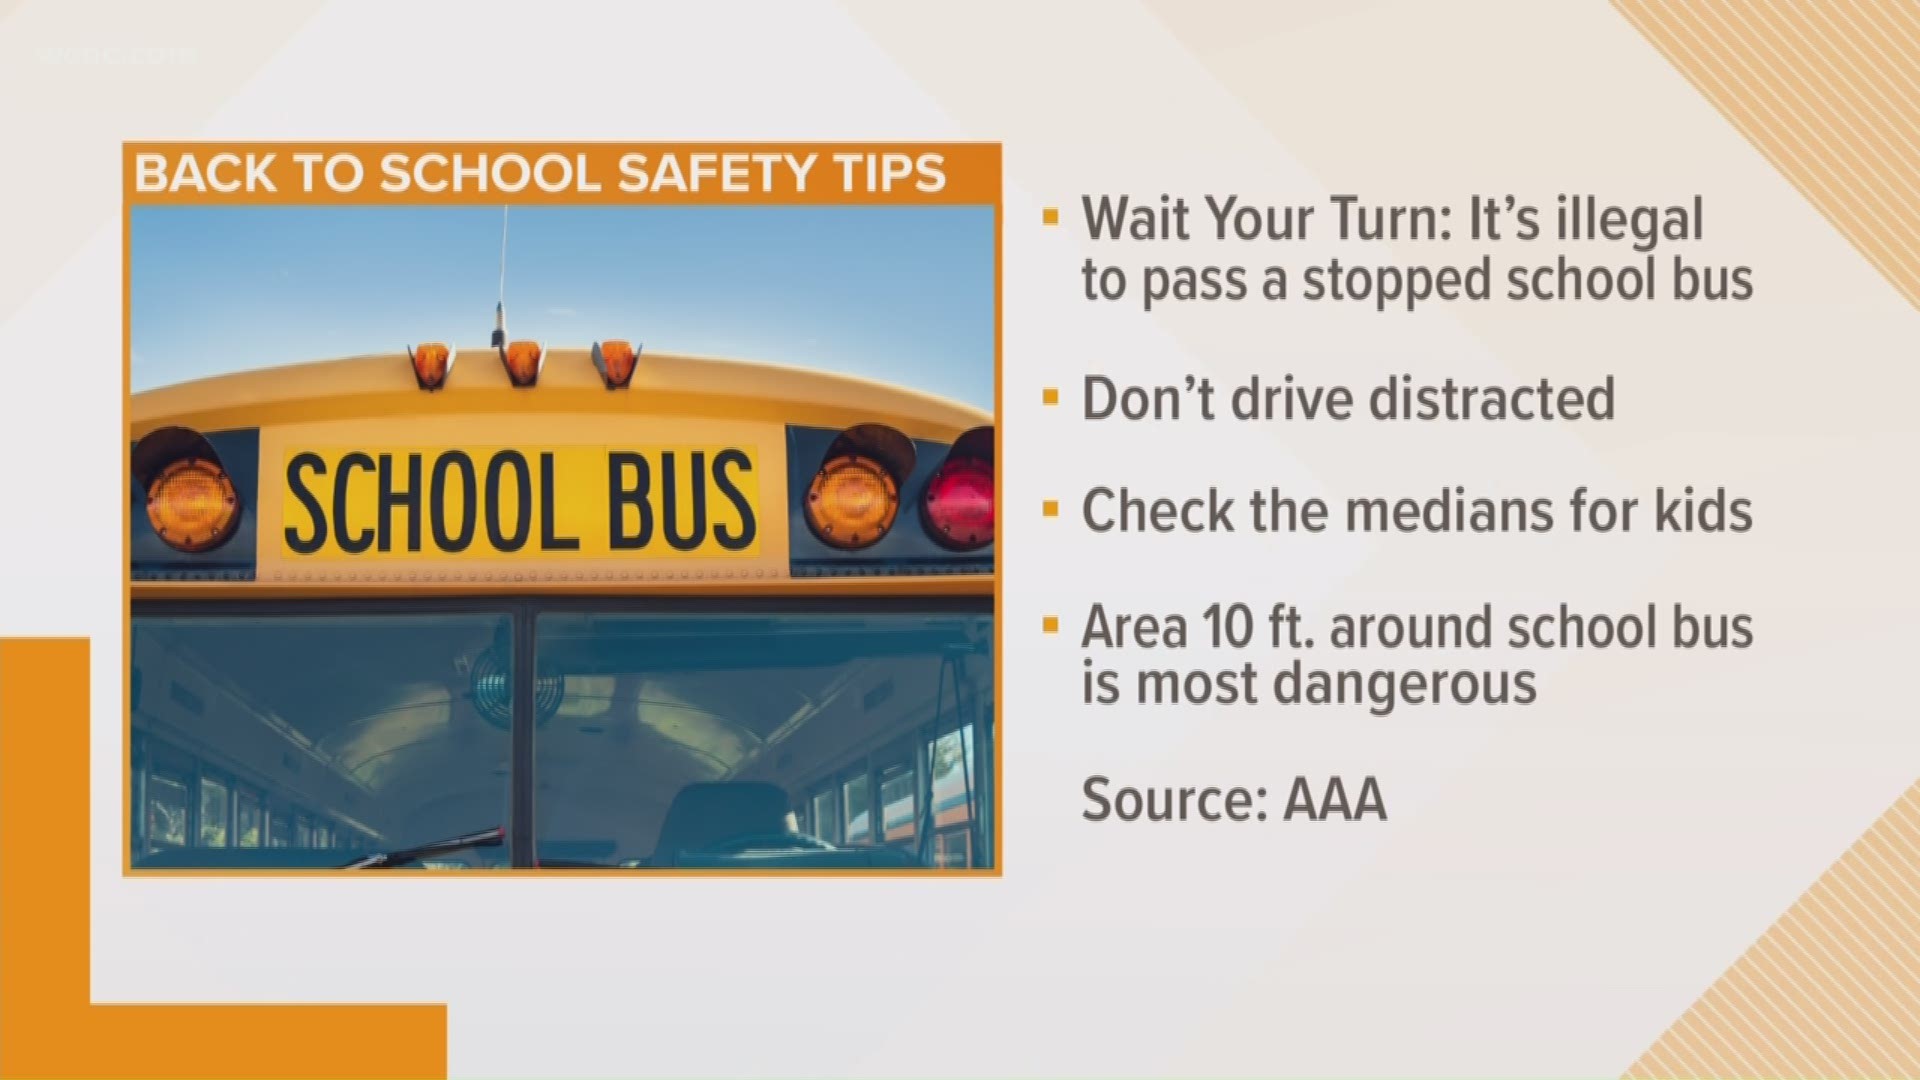 If you're driving through South Carolina Monday, you'll want to be more careful with school buses filling the roads getting kids to and from school.